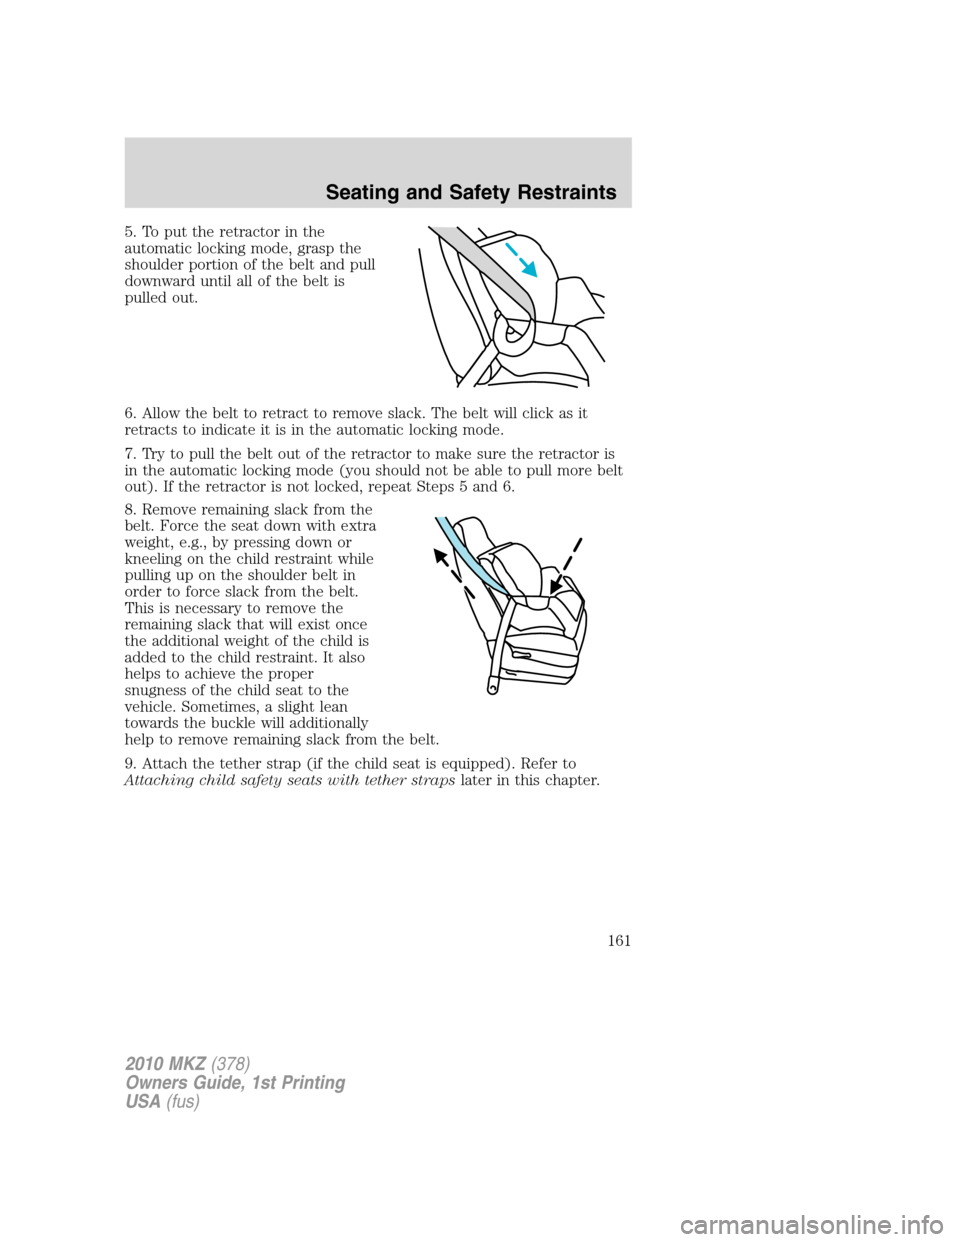 LINCOLN MKZ 2010  Owners Manual 5. To put the retractor in the
automatic locking mode, grasp the
shoulder portion of the belt and pull
downward until all of the belt is
pulled out.
6. Allow the belt to retract to remove slack. The b